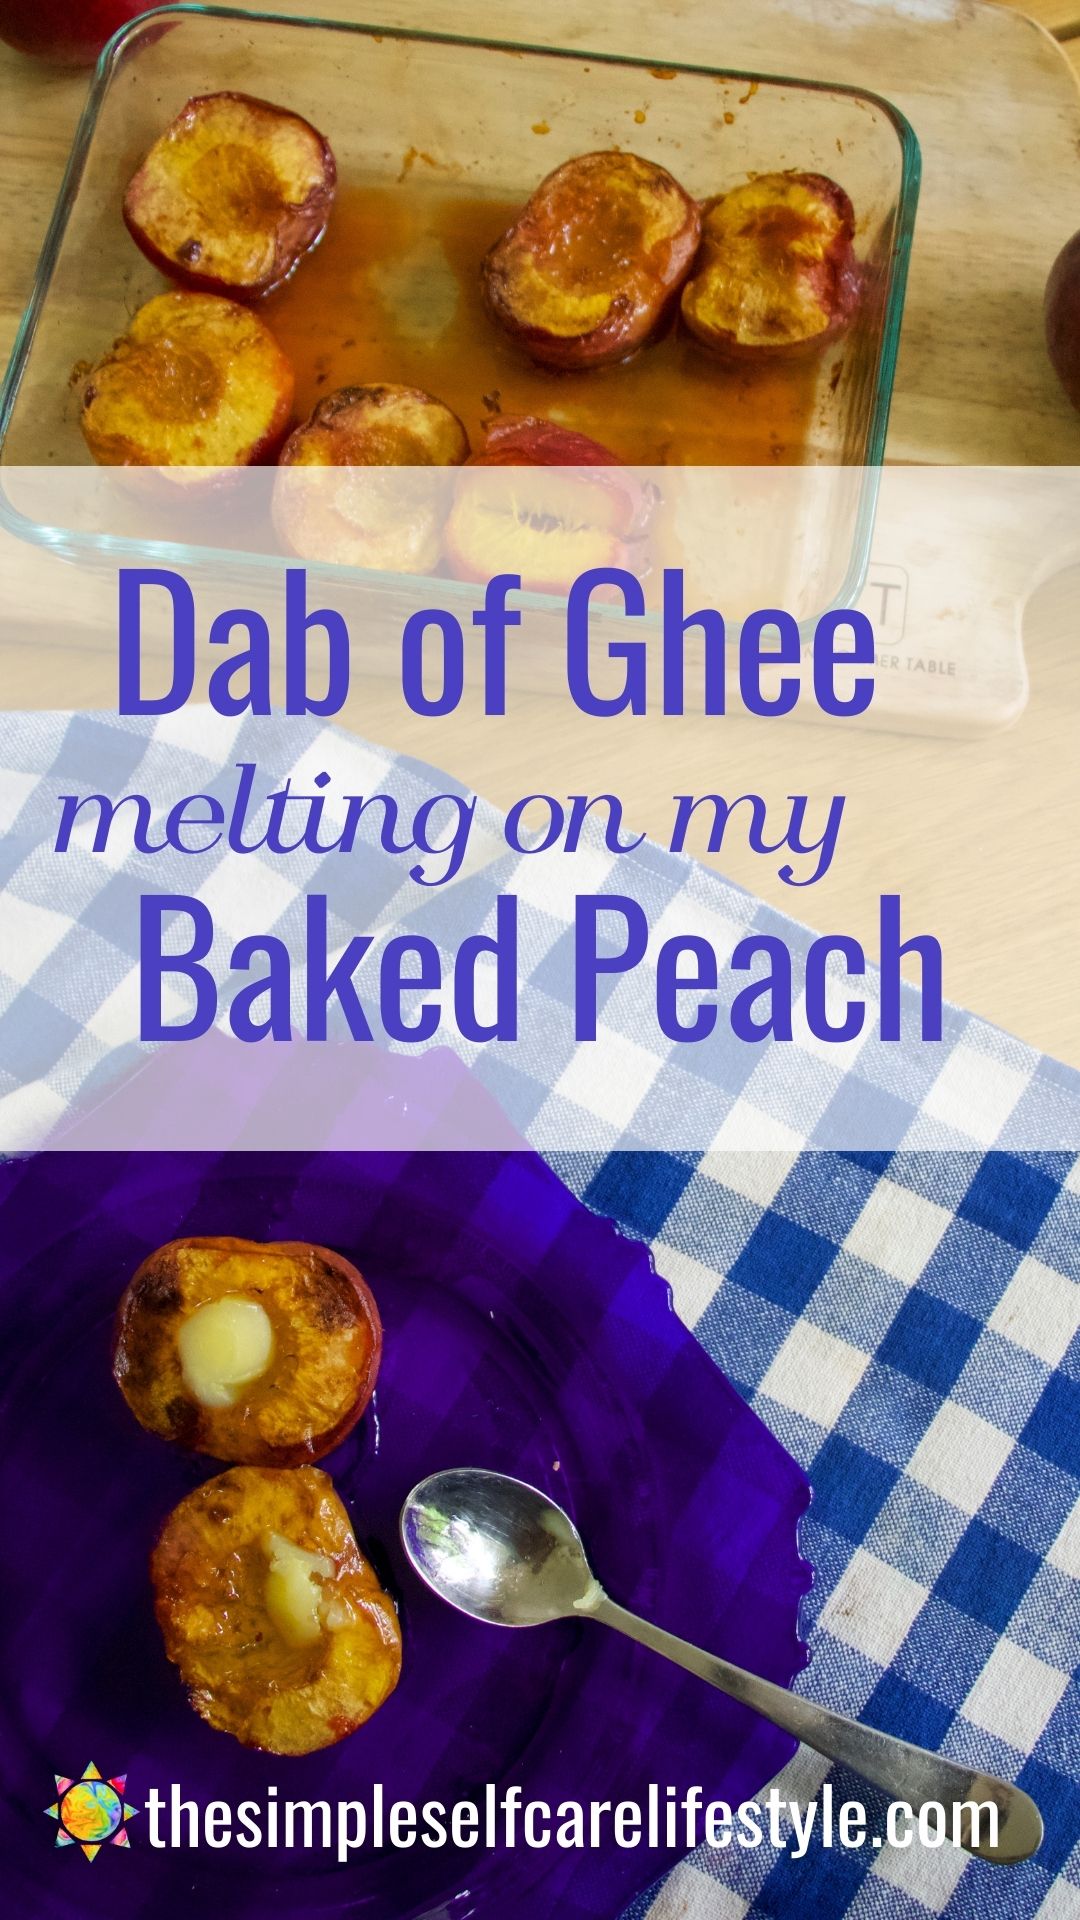 Baked peach with melting ghee.